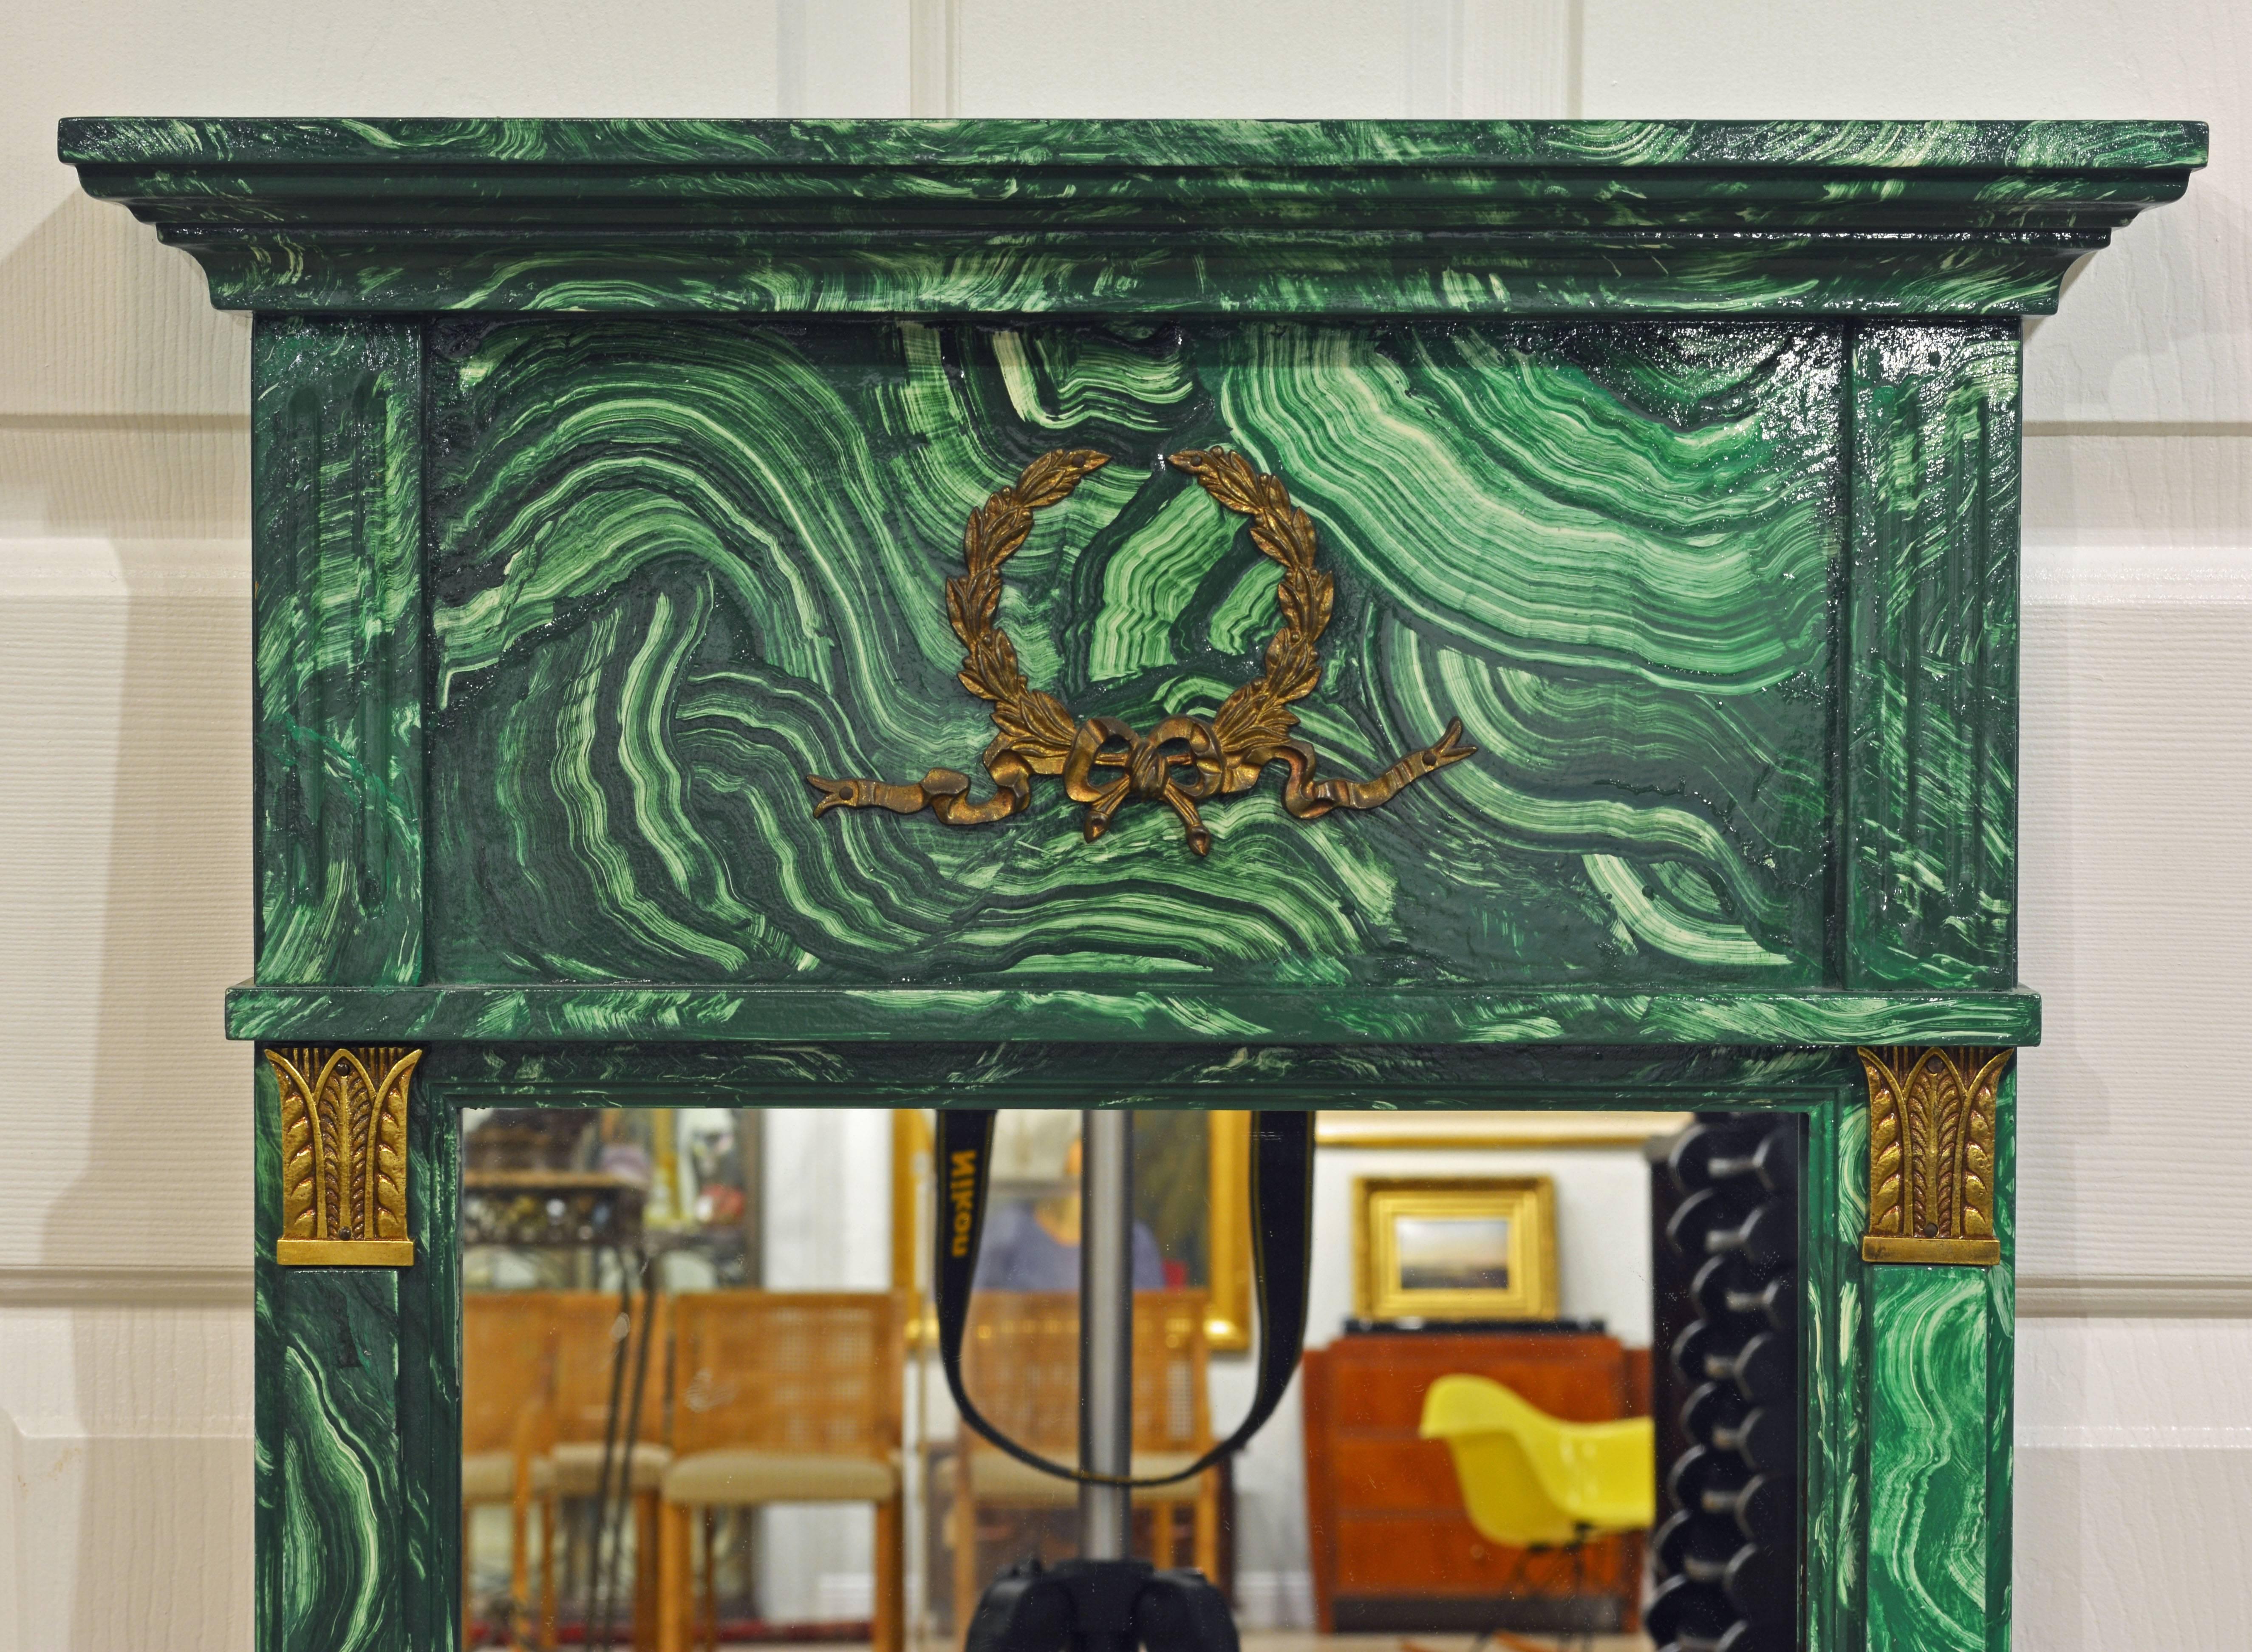 This malachite painted mirror features a neoclassical form with a moulded corniche and gilt bronze mounted top panel above the mirror flanked by bronze crowned pilasters.